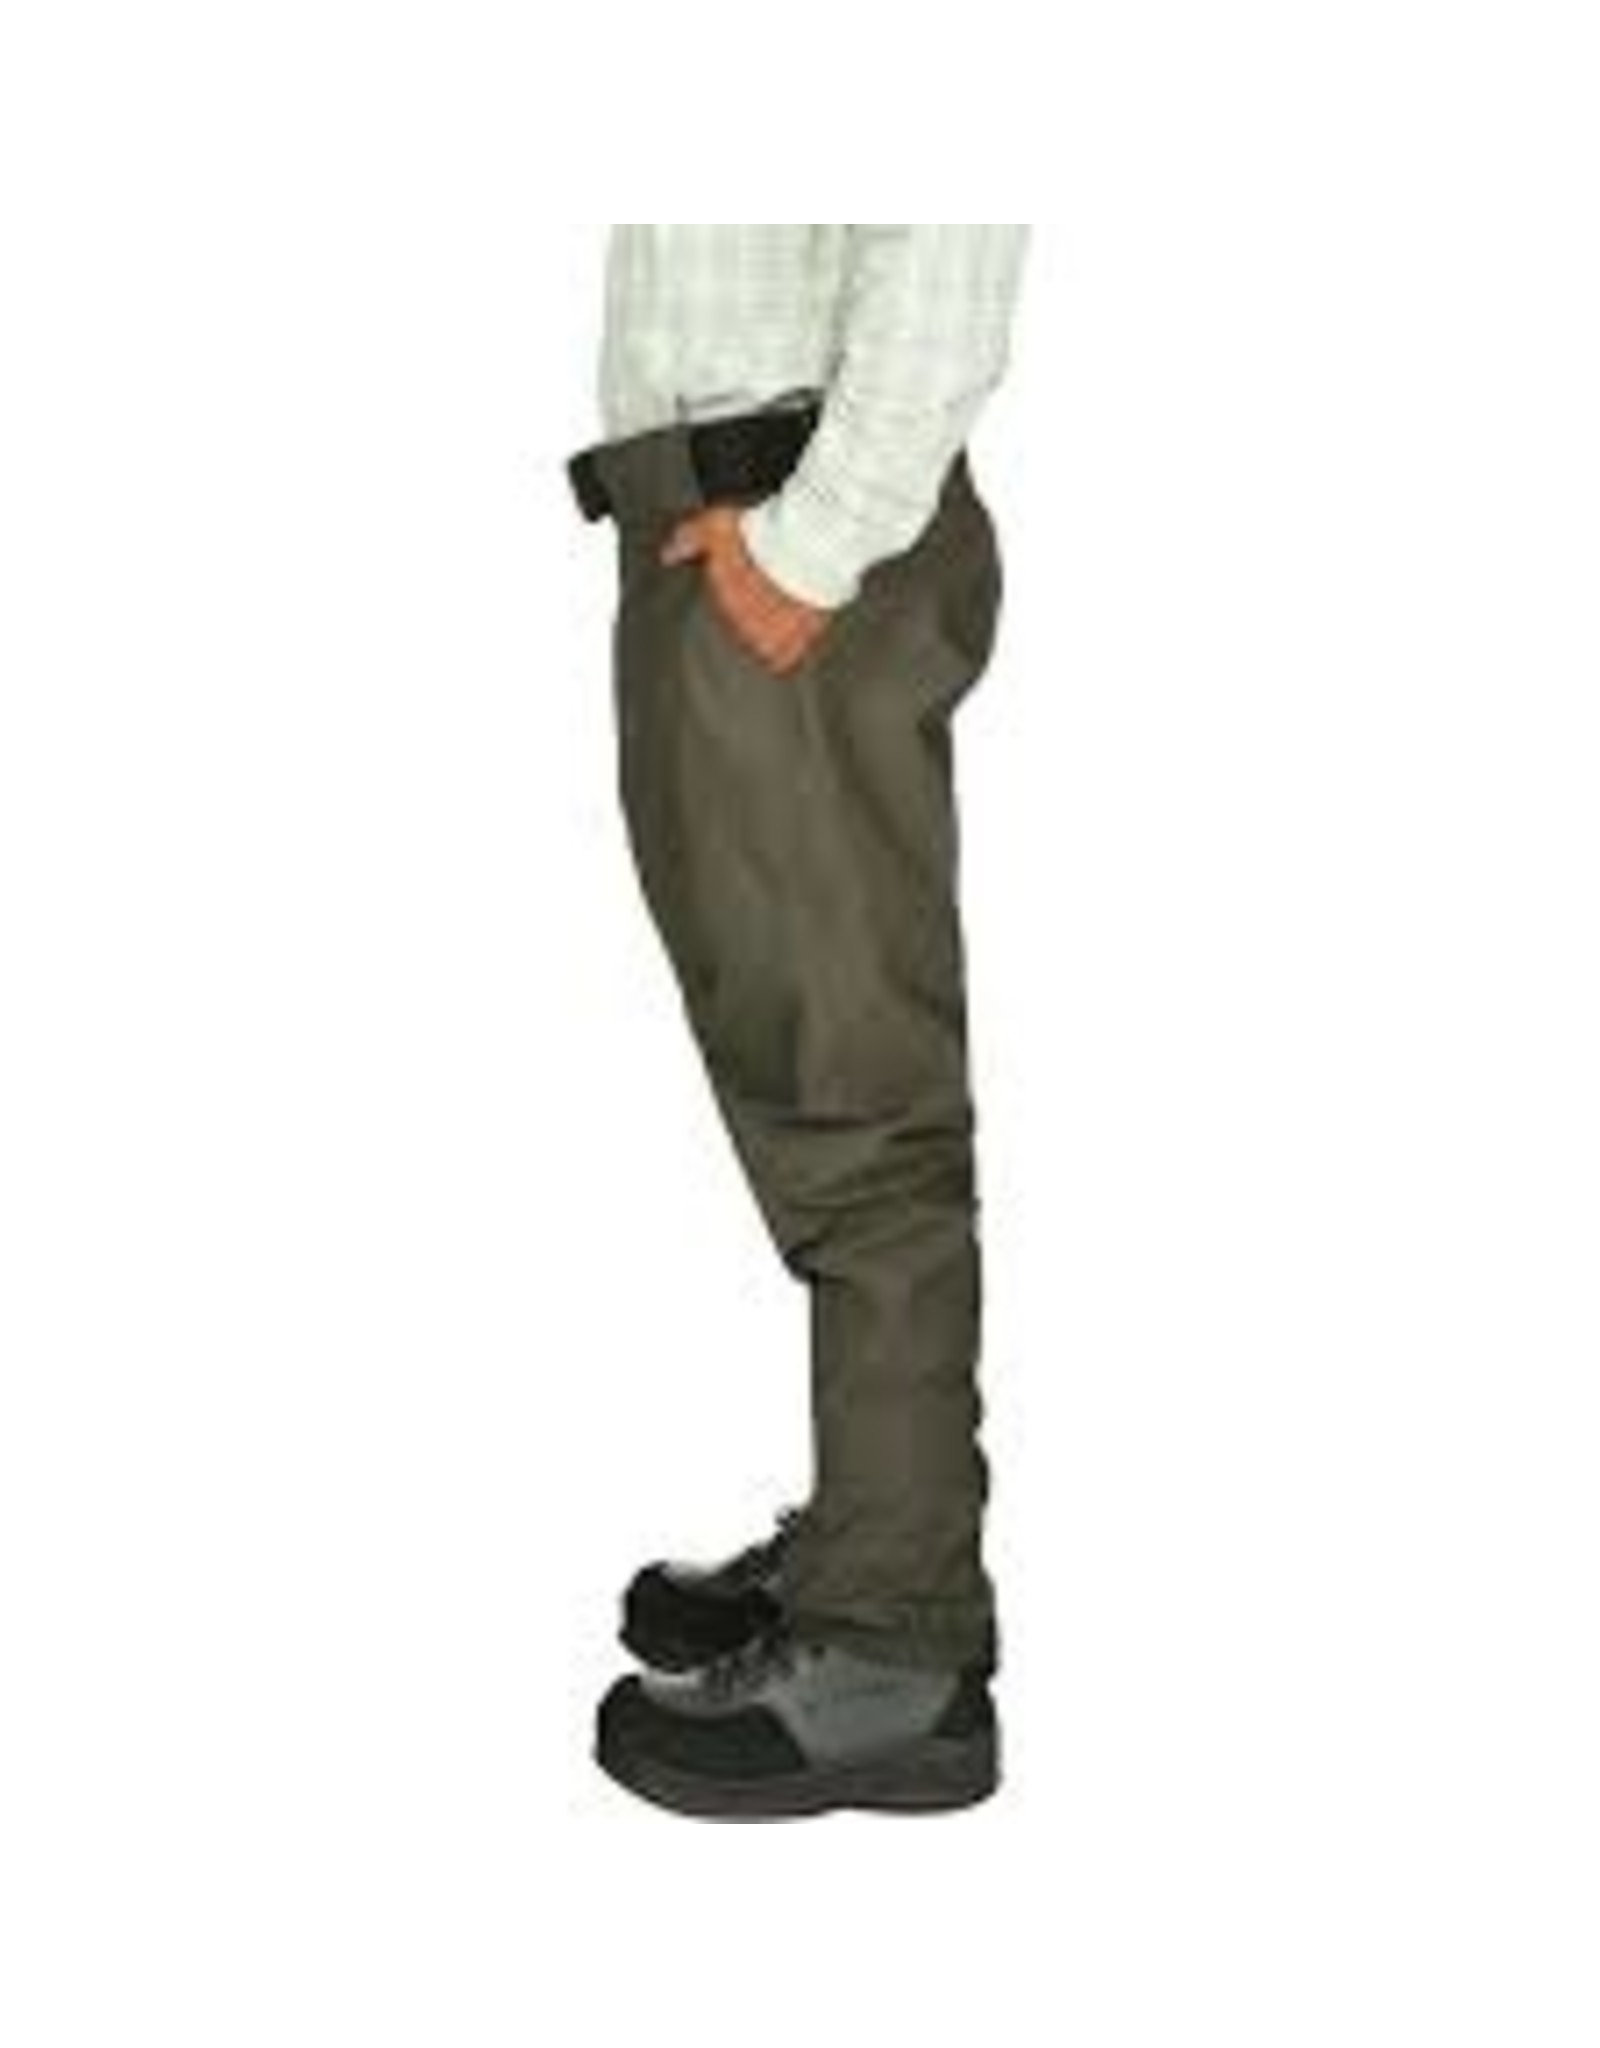 Simms - M's Freestone Wading Pant (Clearance) - Mountain Angler